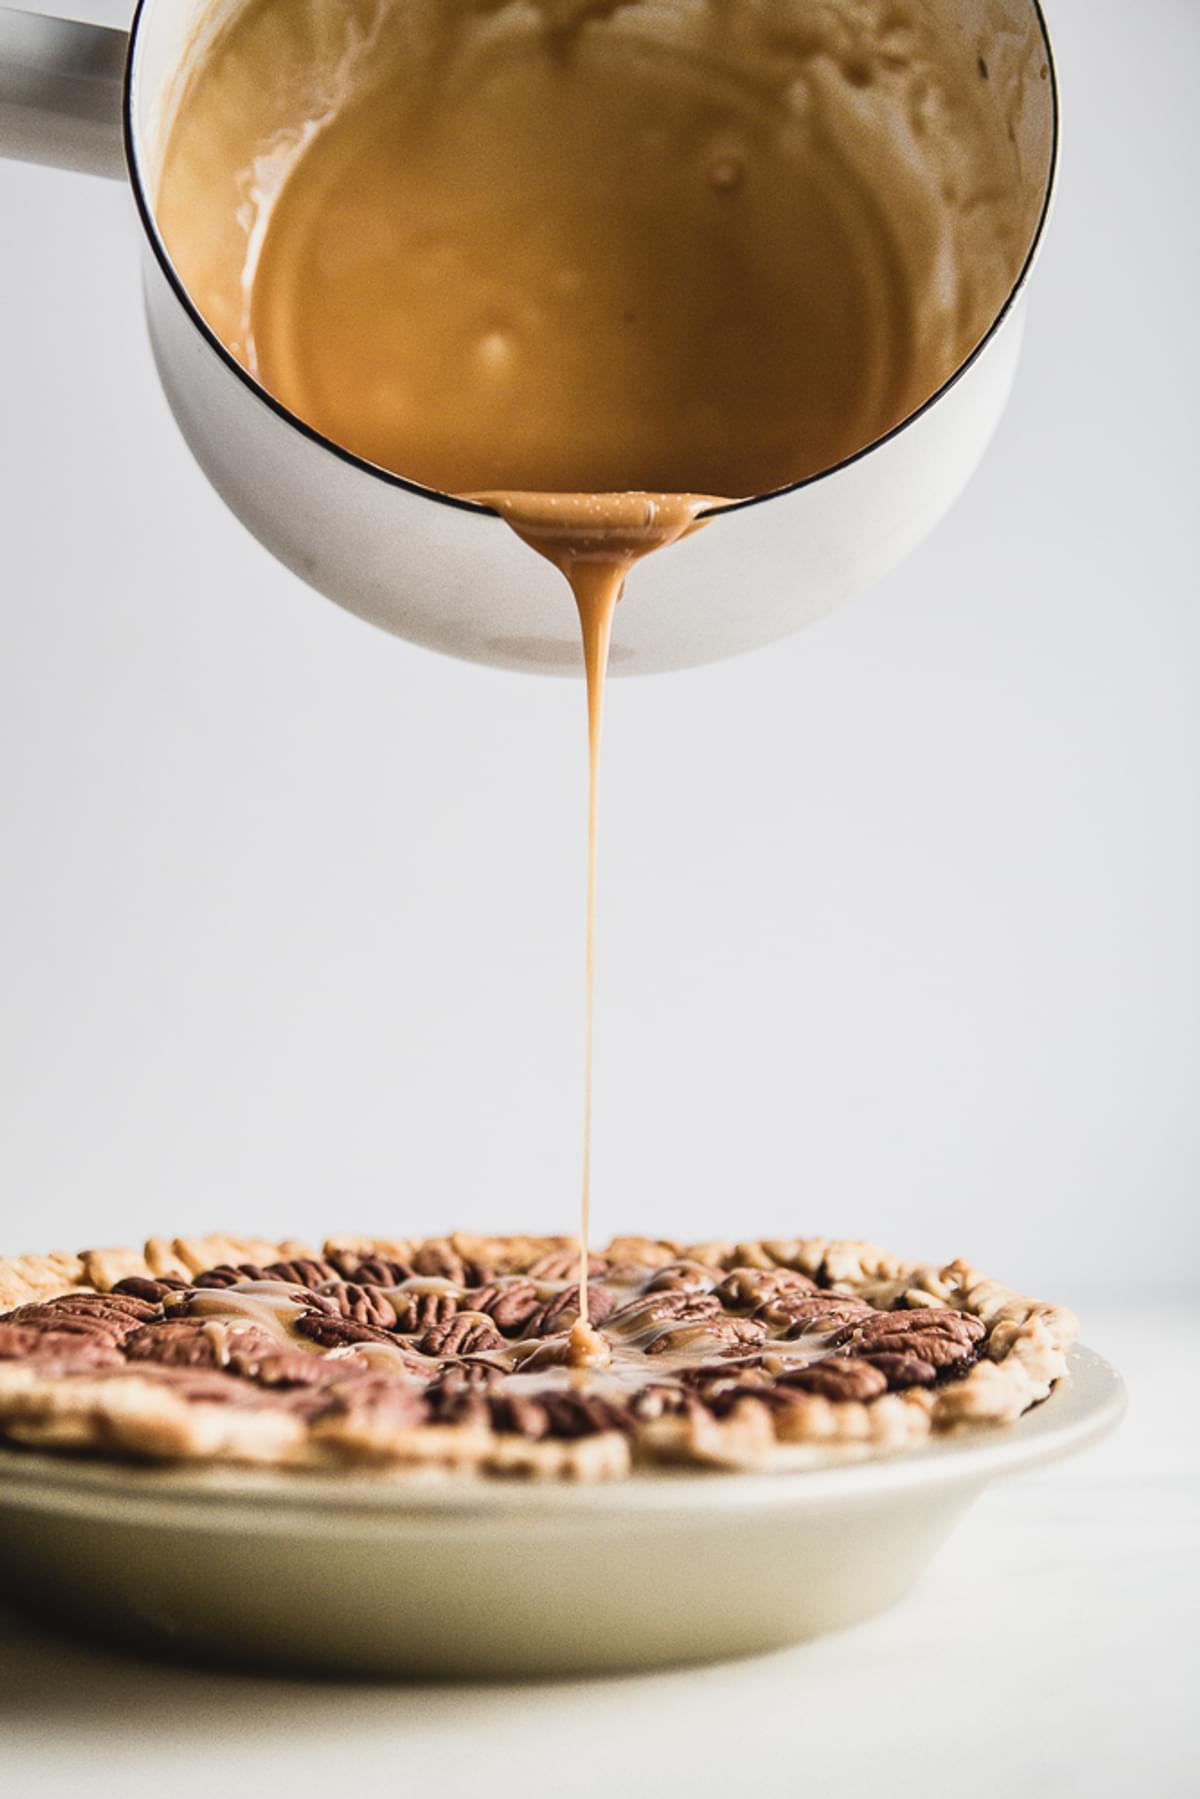 caramel sauce being poured over an apple pie